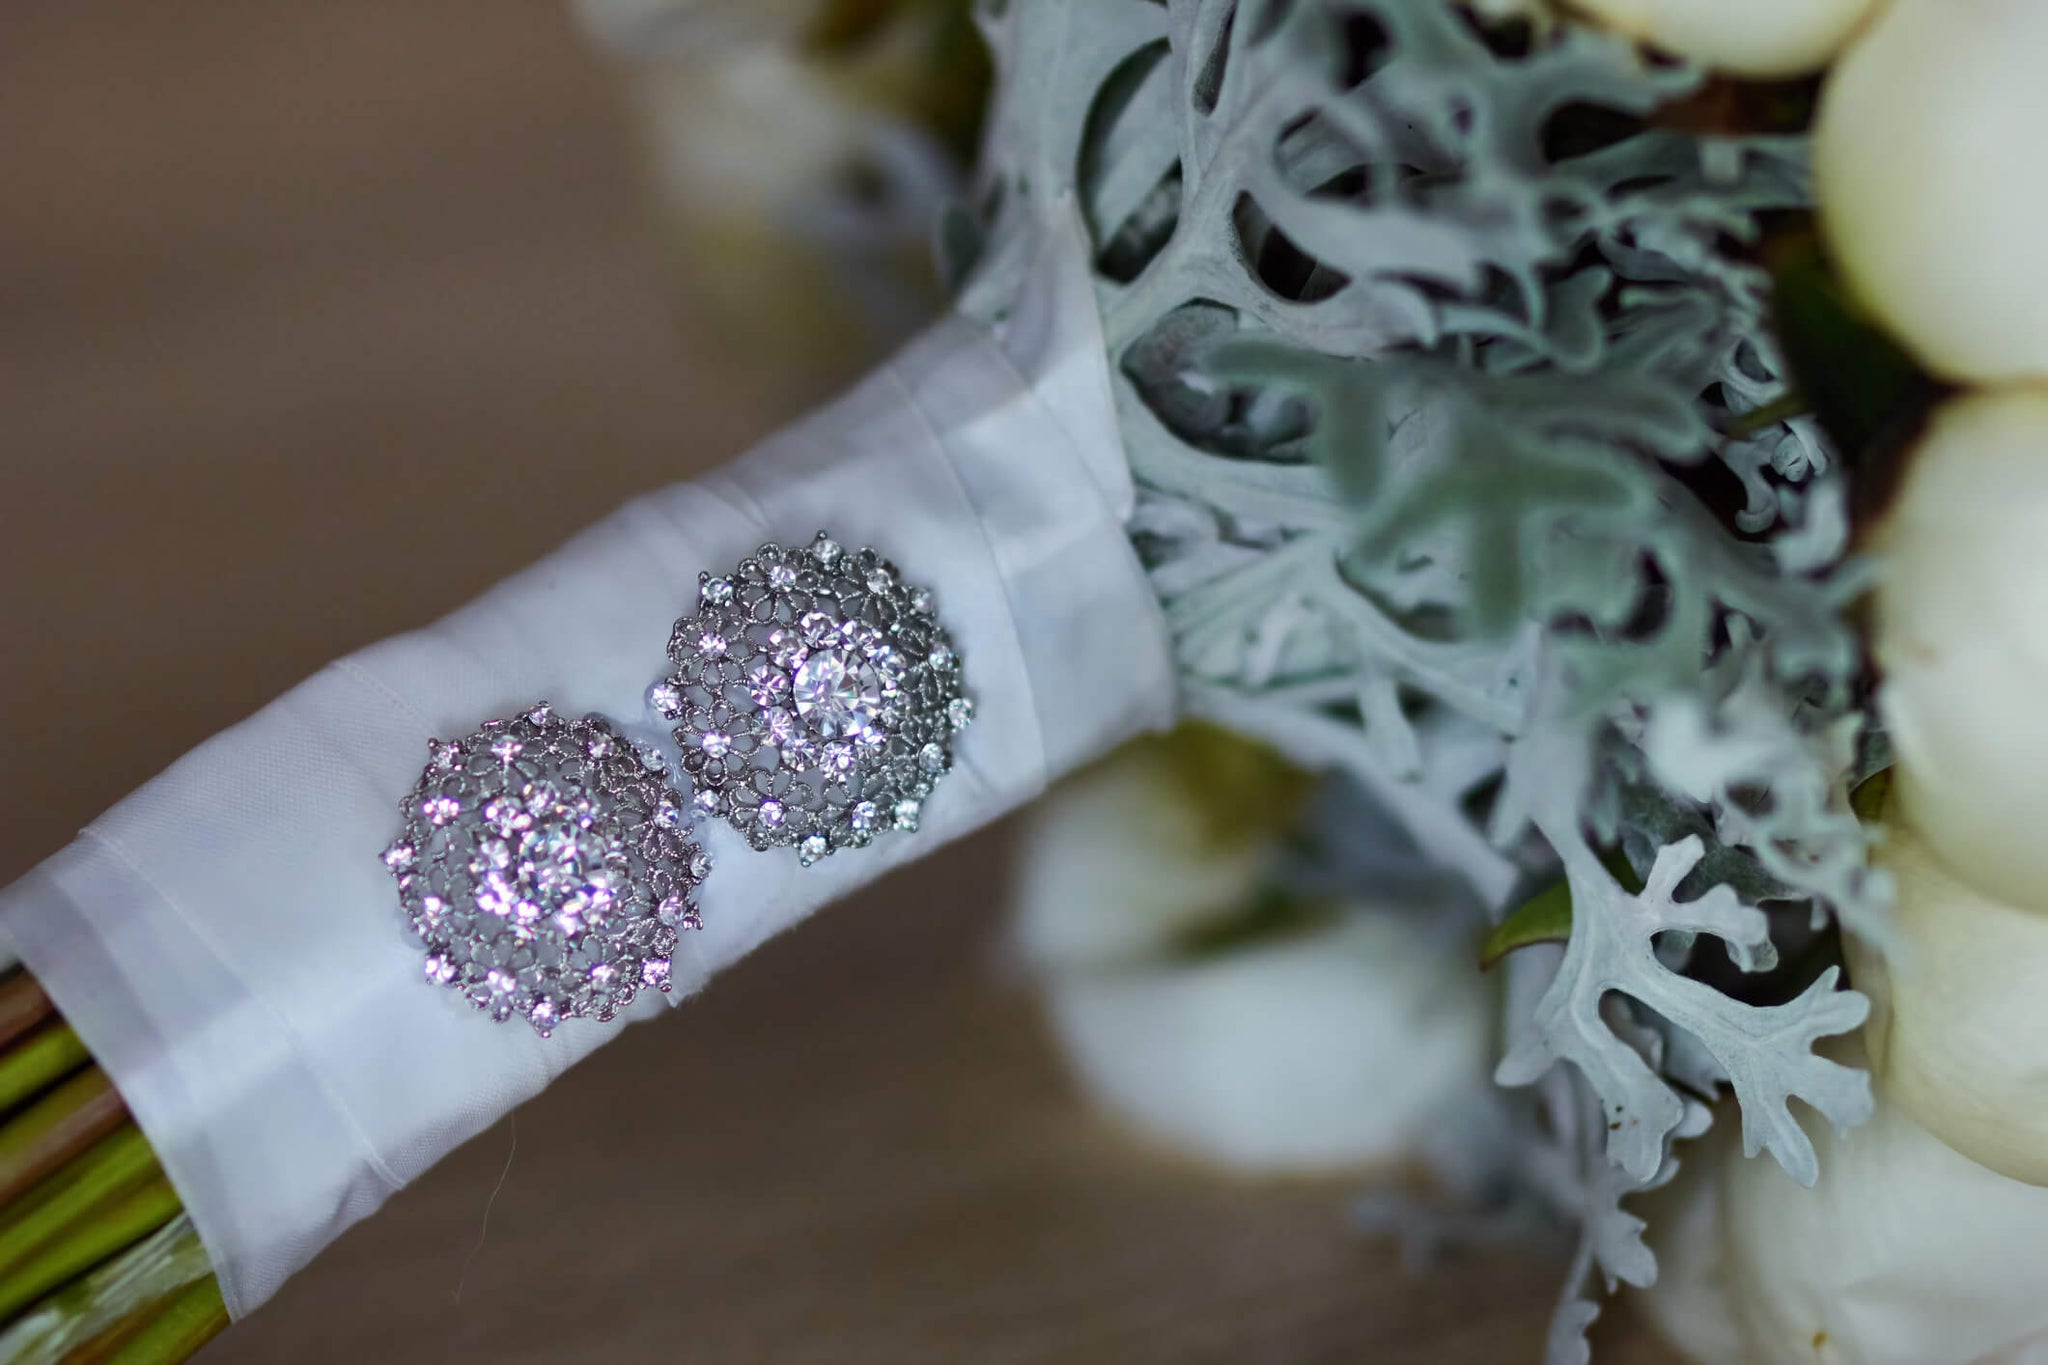 Embellishment added to the binding of the wedding bouquet.